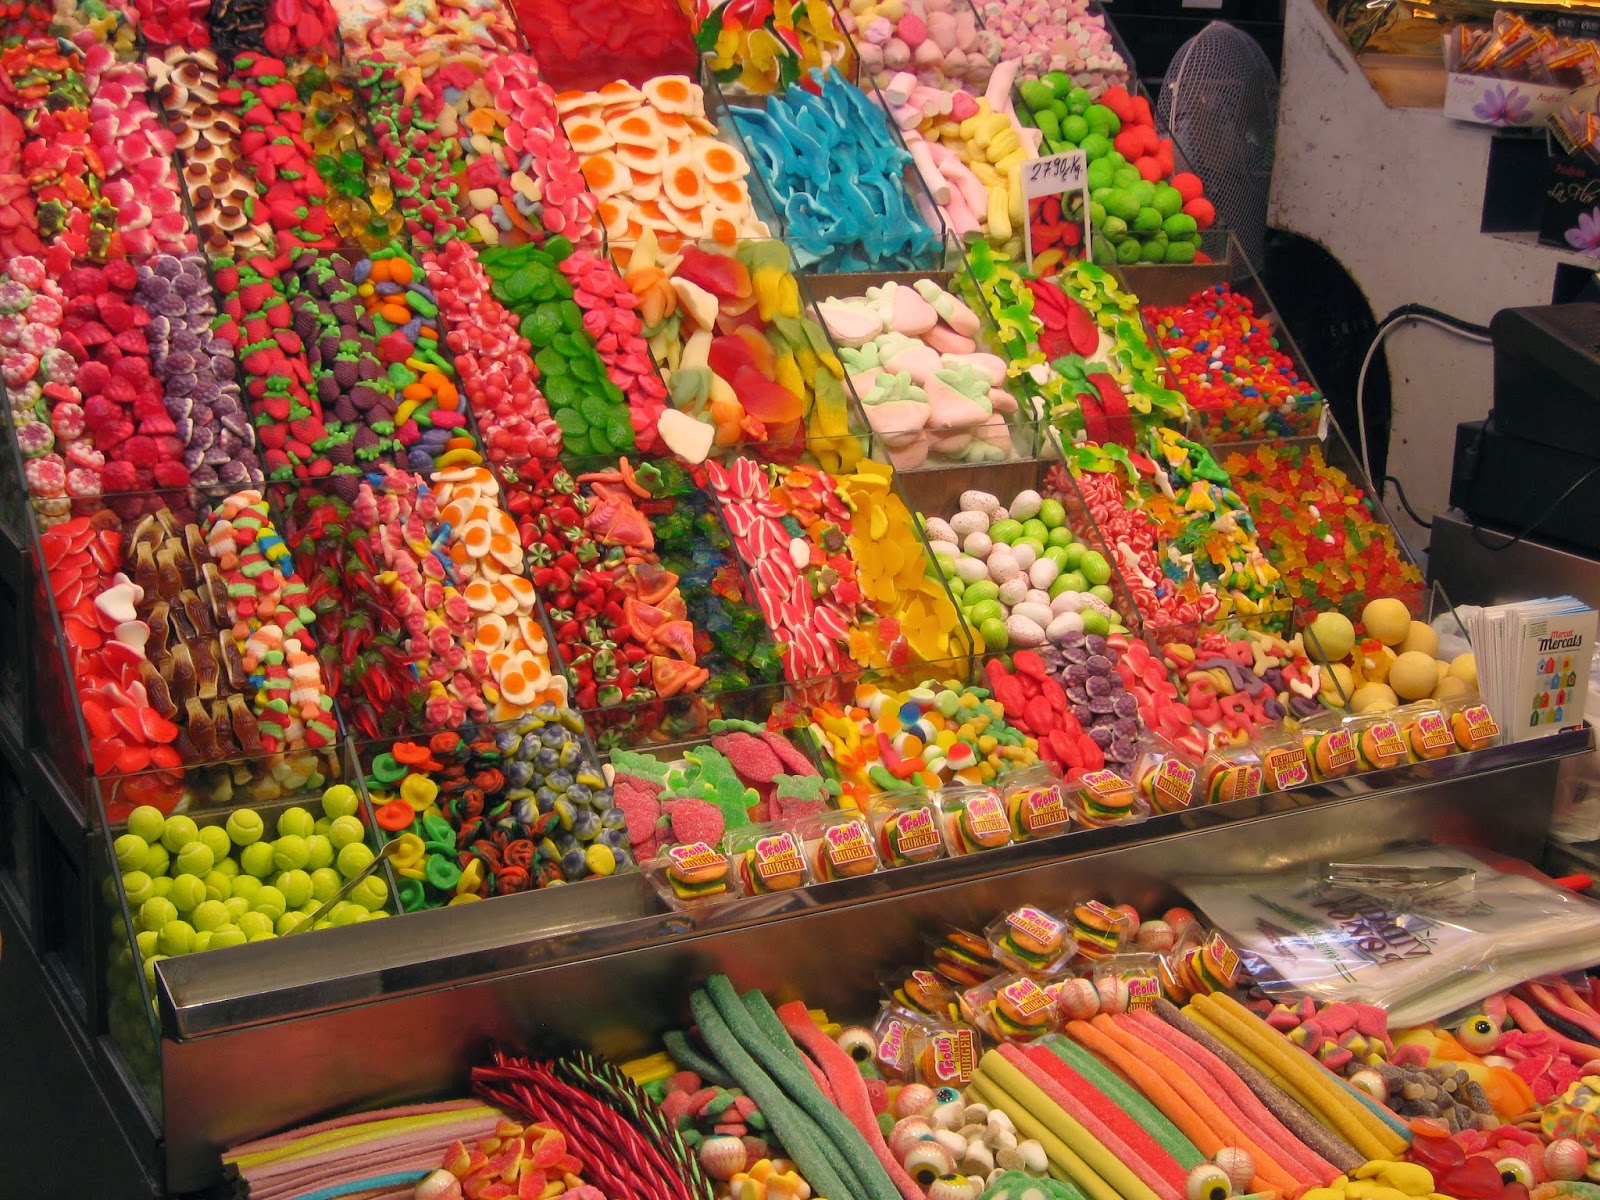 Barcelona - this is one of the more colorful candy stalls at La Boqueria market